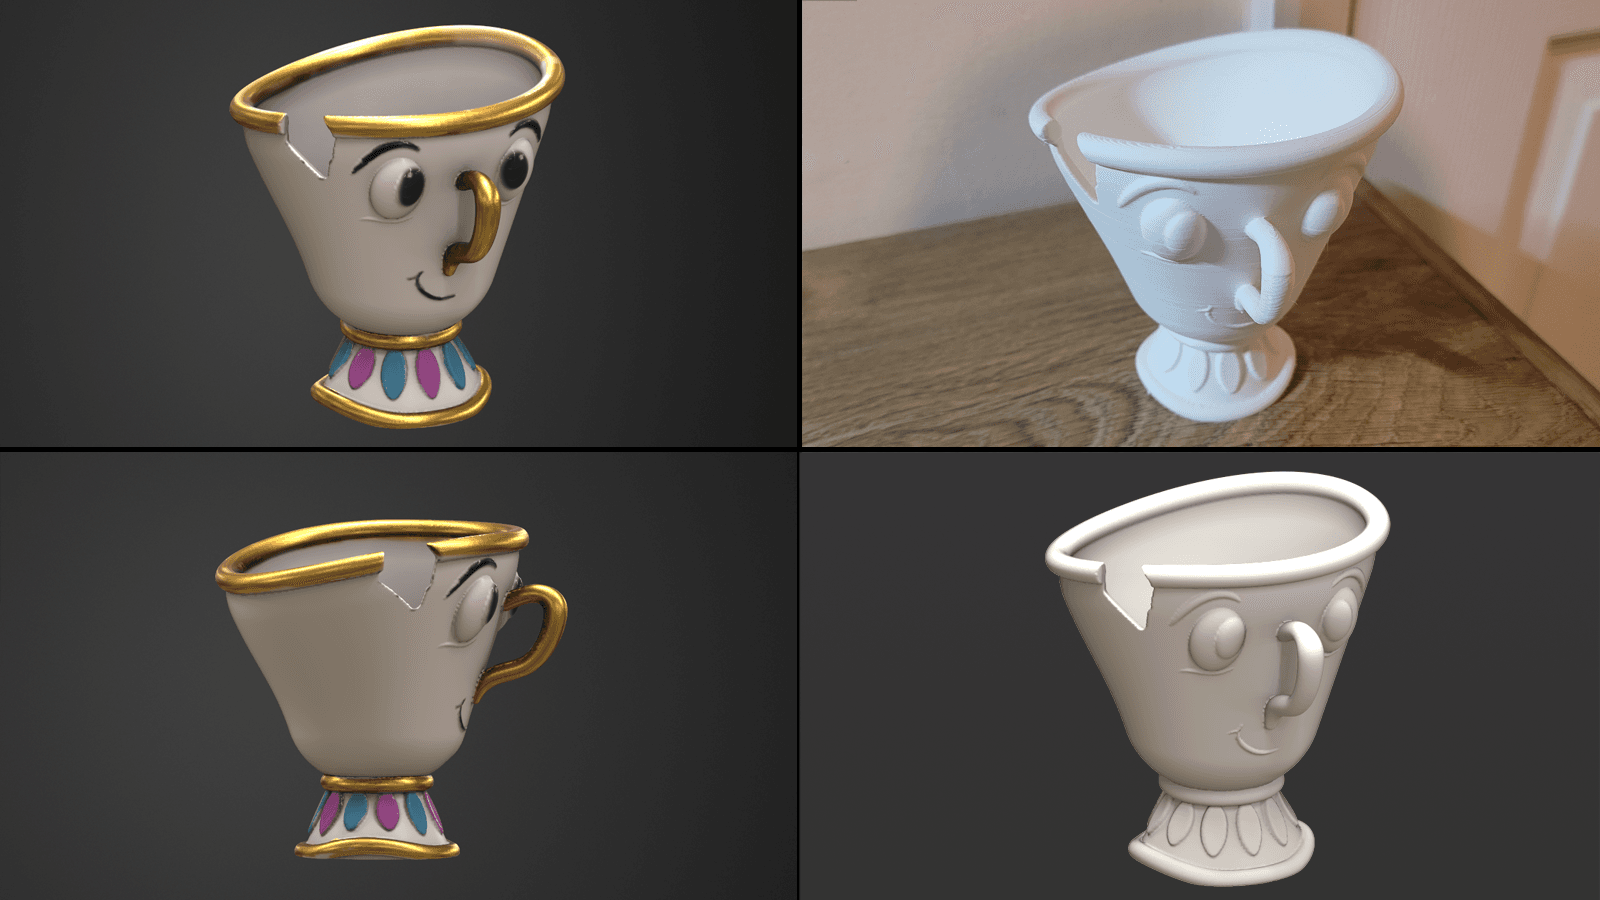 Chip from beauty and the beast - easy print, no support 3d model